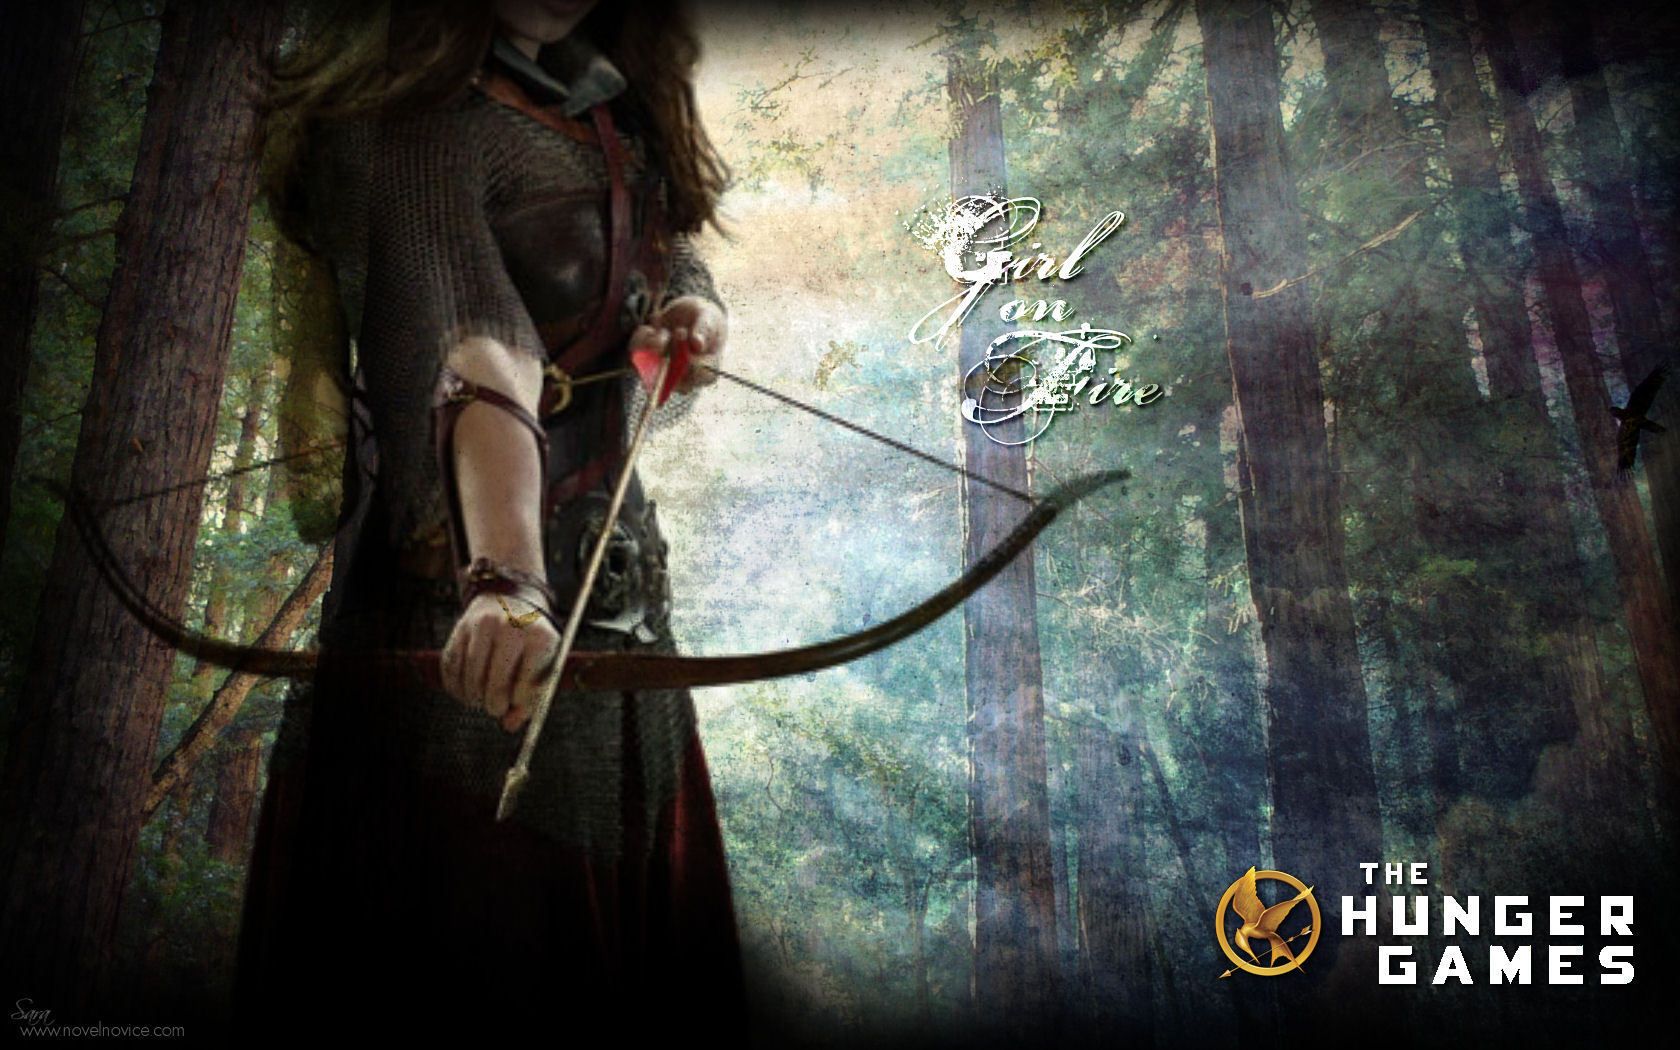 Free download The Hunger Games Wallpaper The Hunger Games